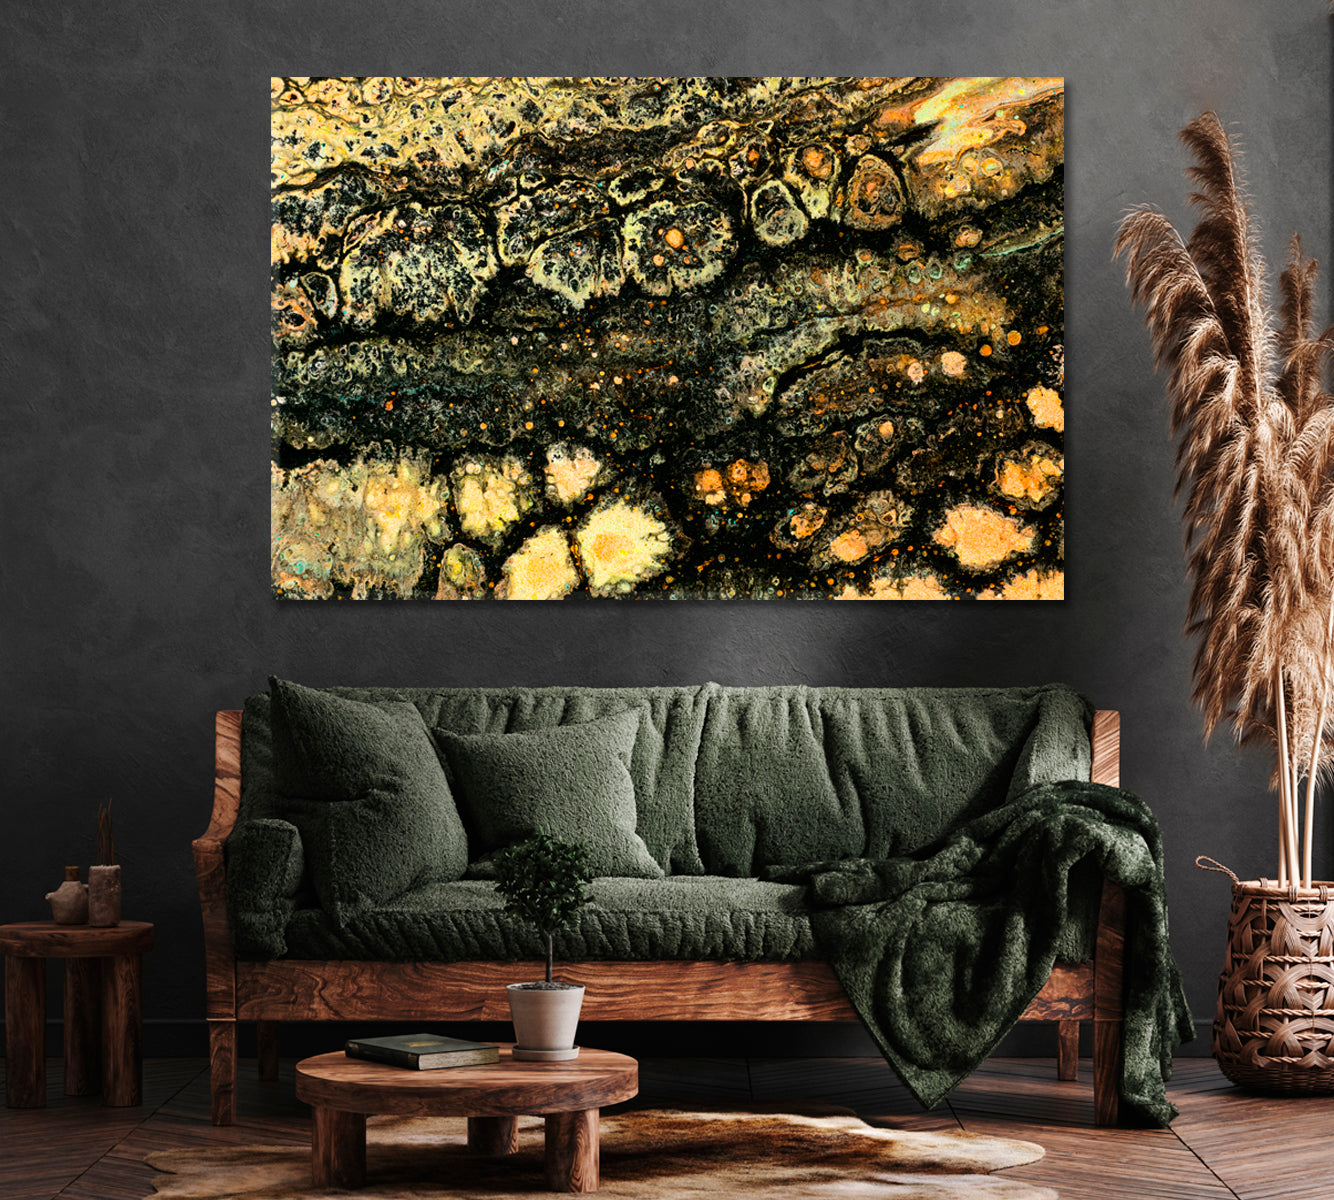 Abstract Grunge Pattern Canvas Print ArtLexy 1 Panel 24"x16" inches 